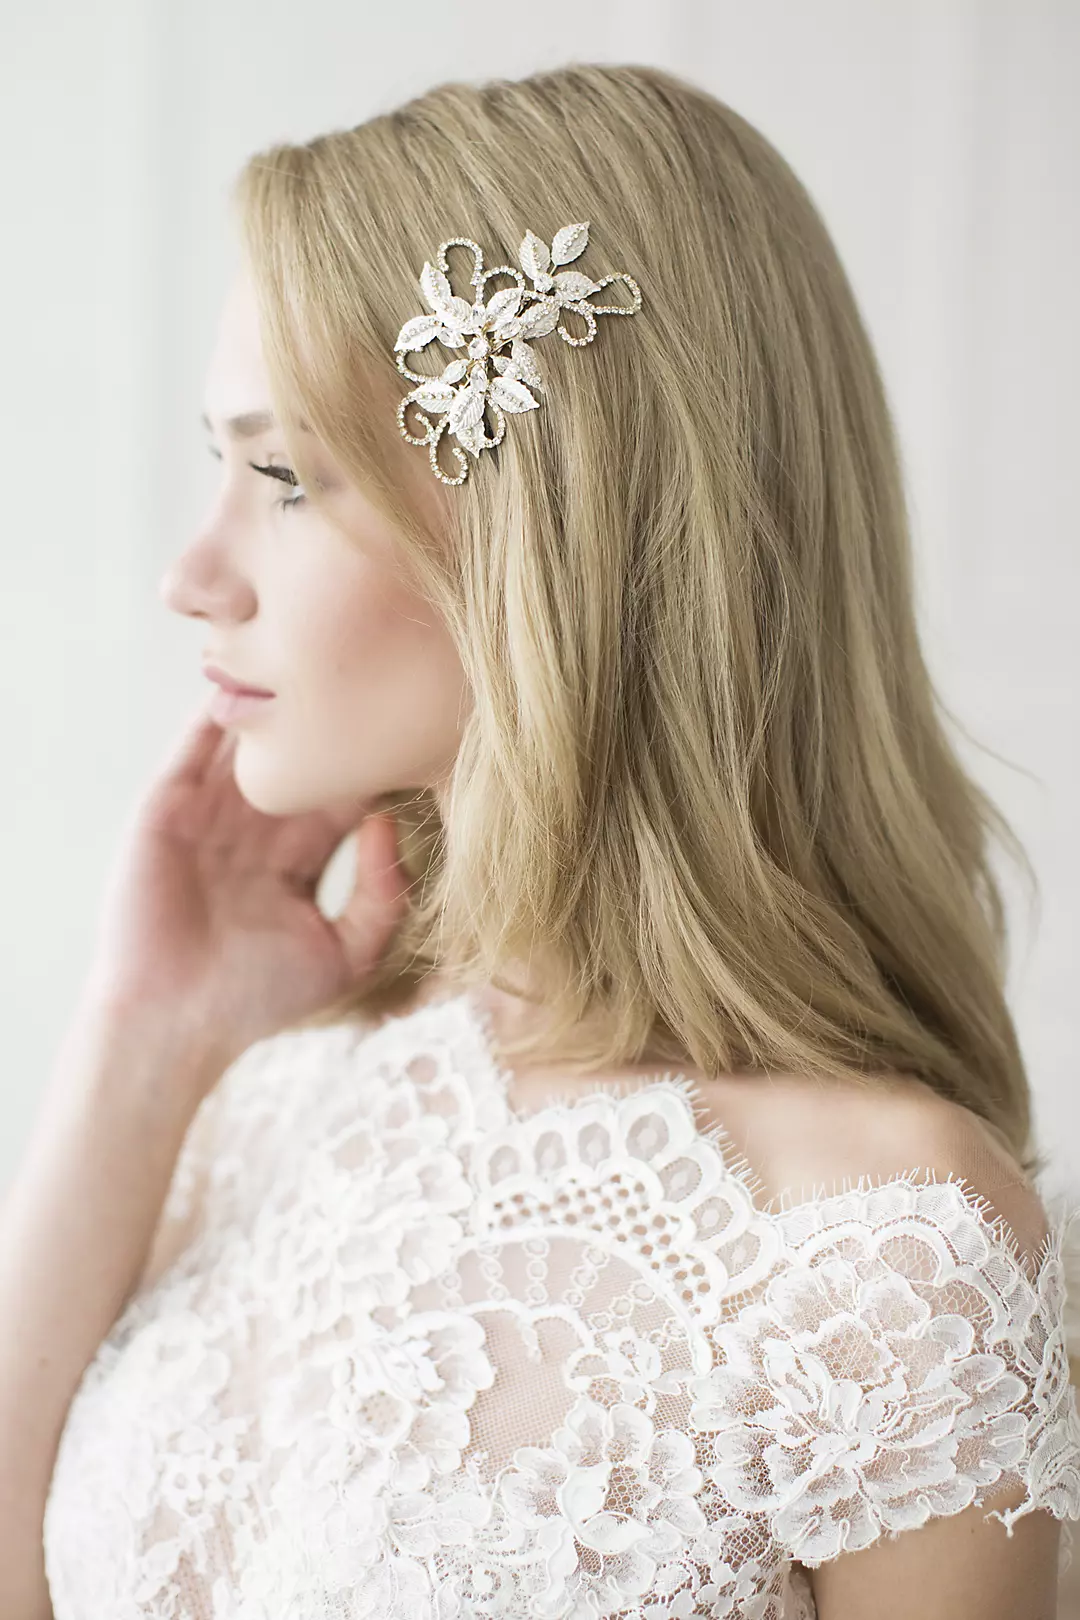 Hand-Wired Floral Comb with Swarovski Crystals Image